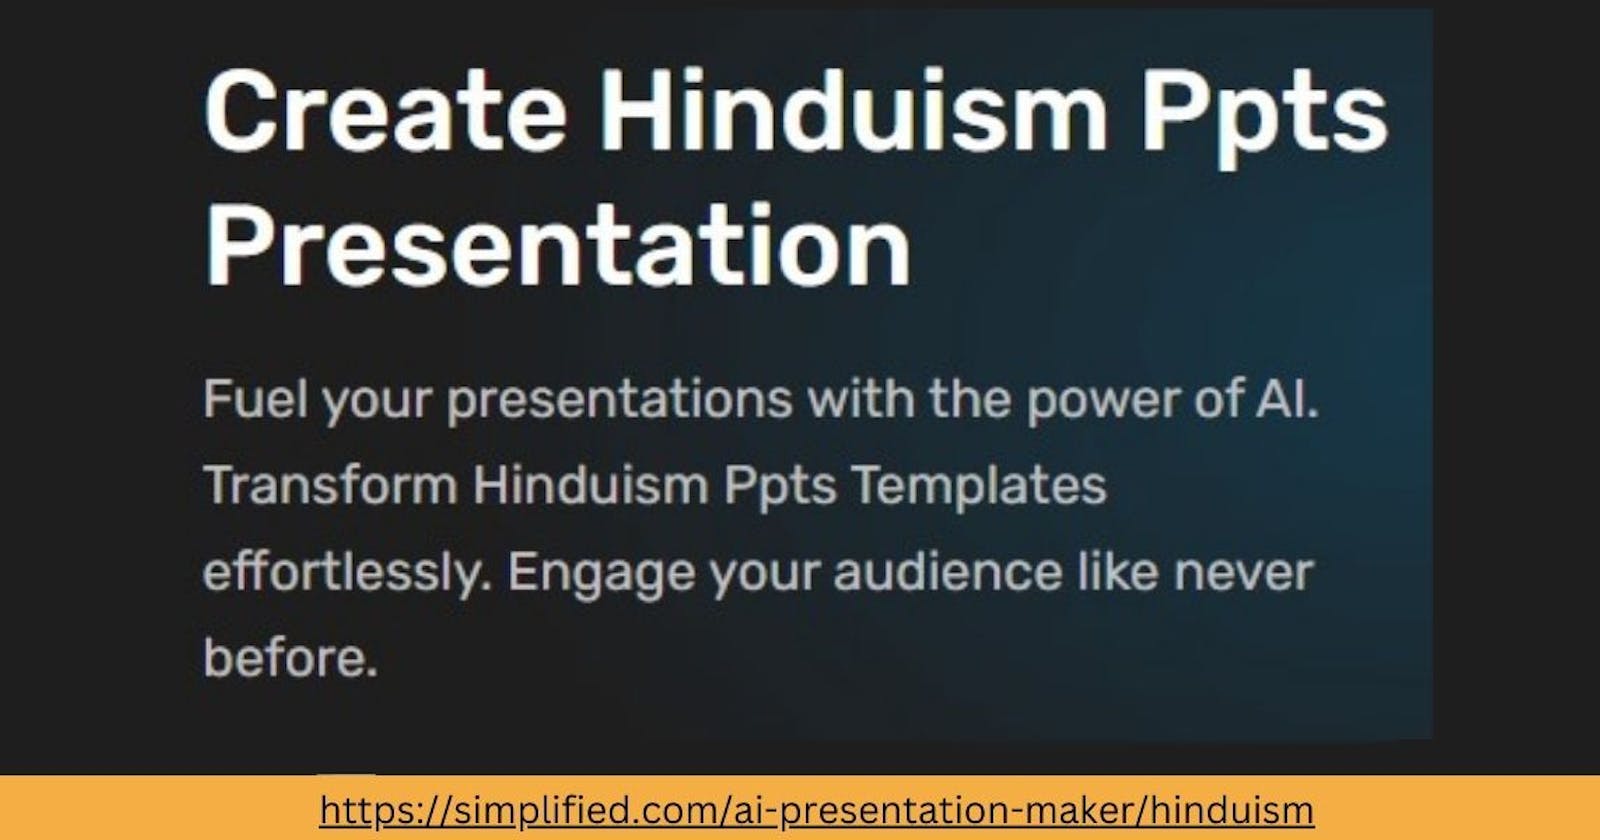 Create Dynamic Hinduism PPT Presentations Online: Simplified Presentation Tool